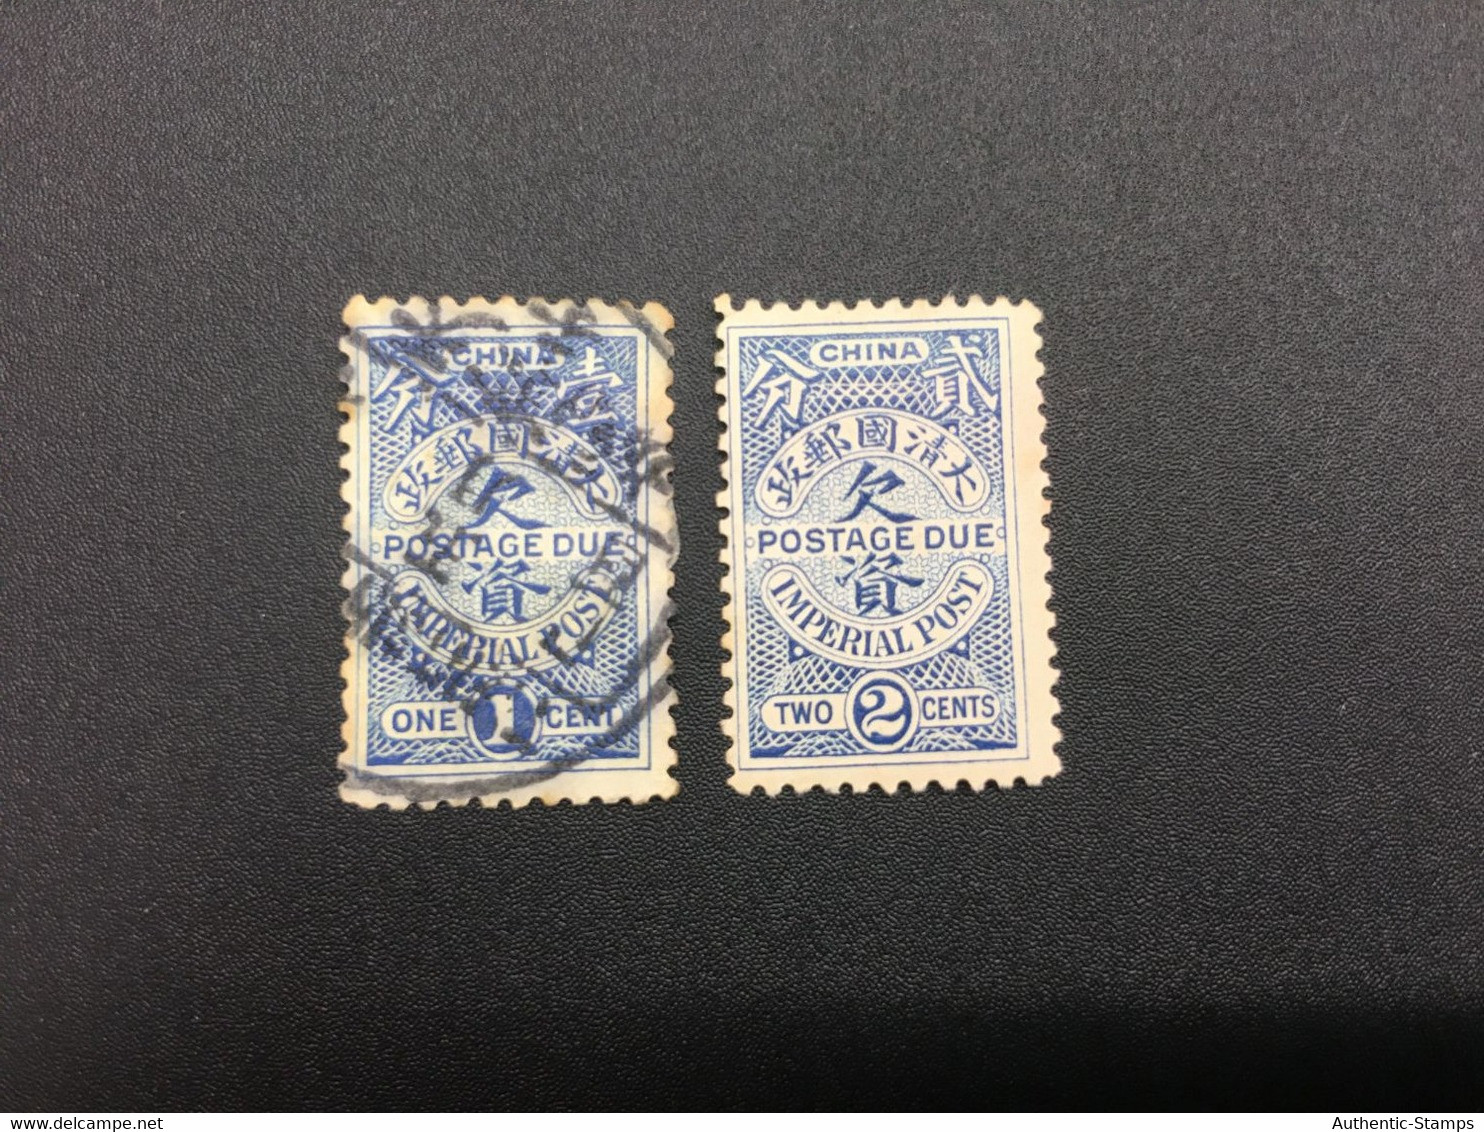 CHINA STAMP, USED, TIMBRO, STEMPEL,  CINA, CHINE, LIST 7291 - Oblitérés